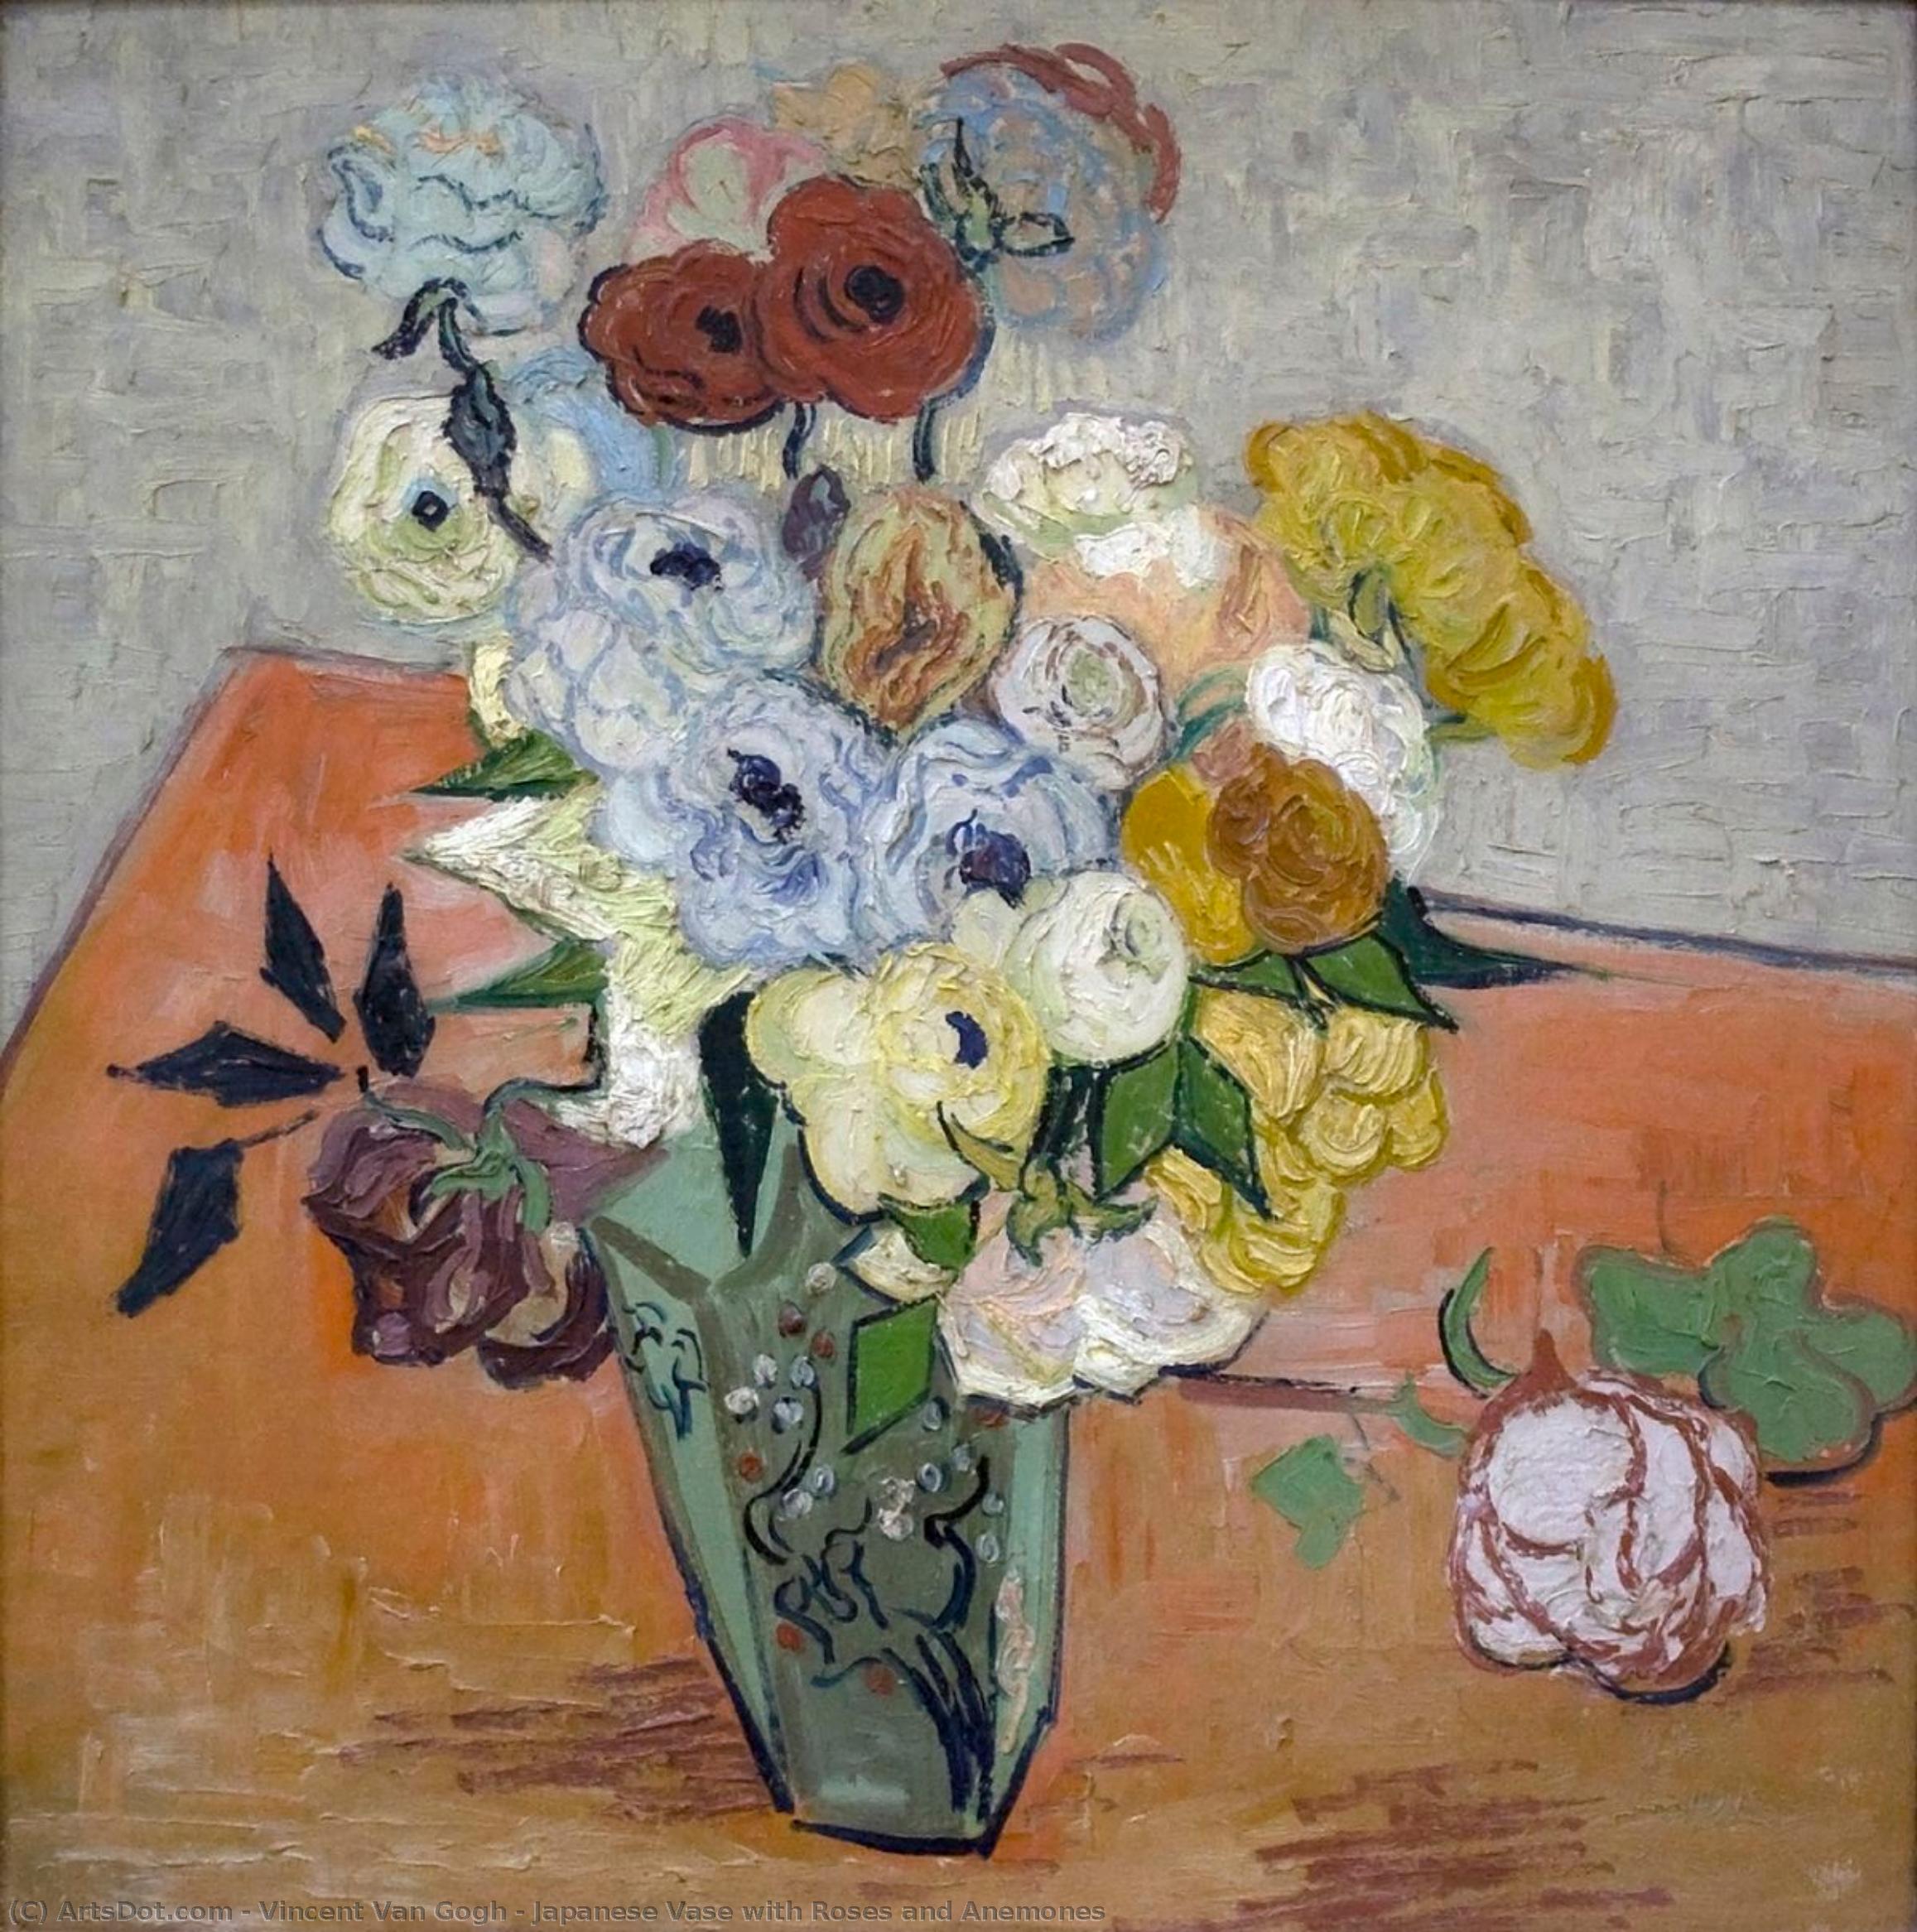 WikiOO.org - 백과 사전 - 회화, 삽화 Vincent Van Gogh - Japanese Vase with Roses and Anemones